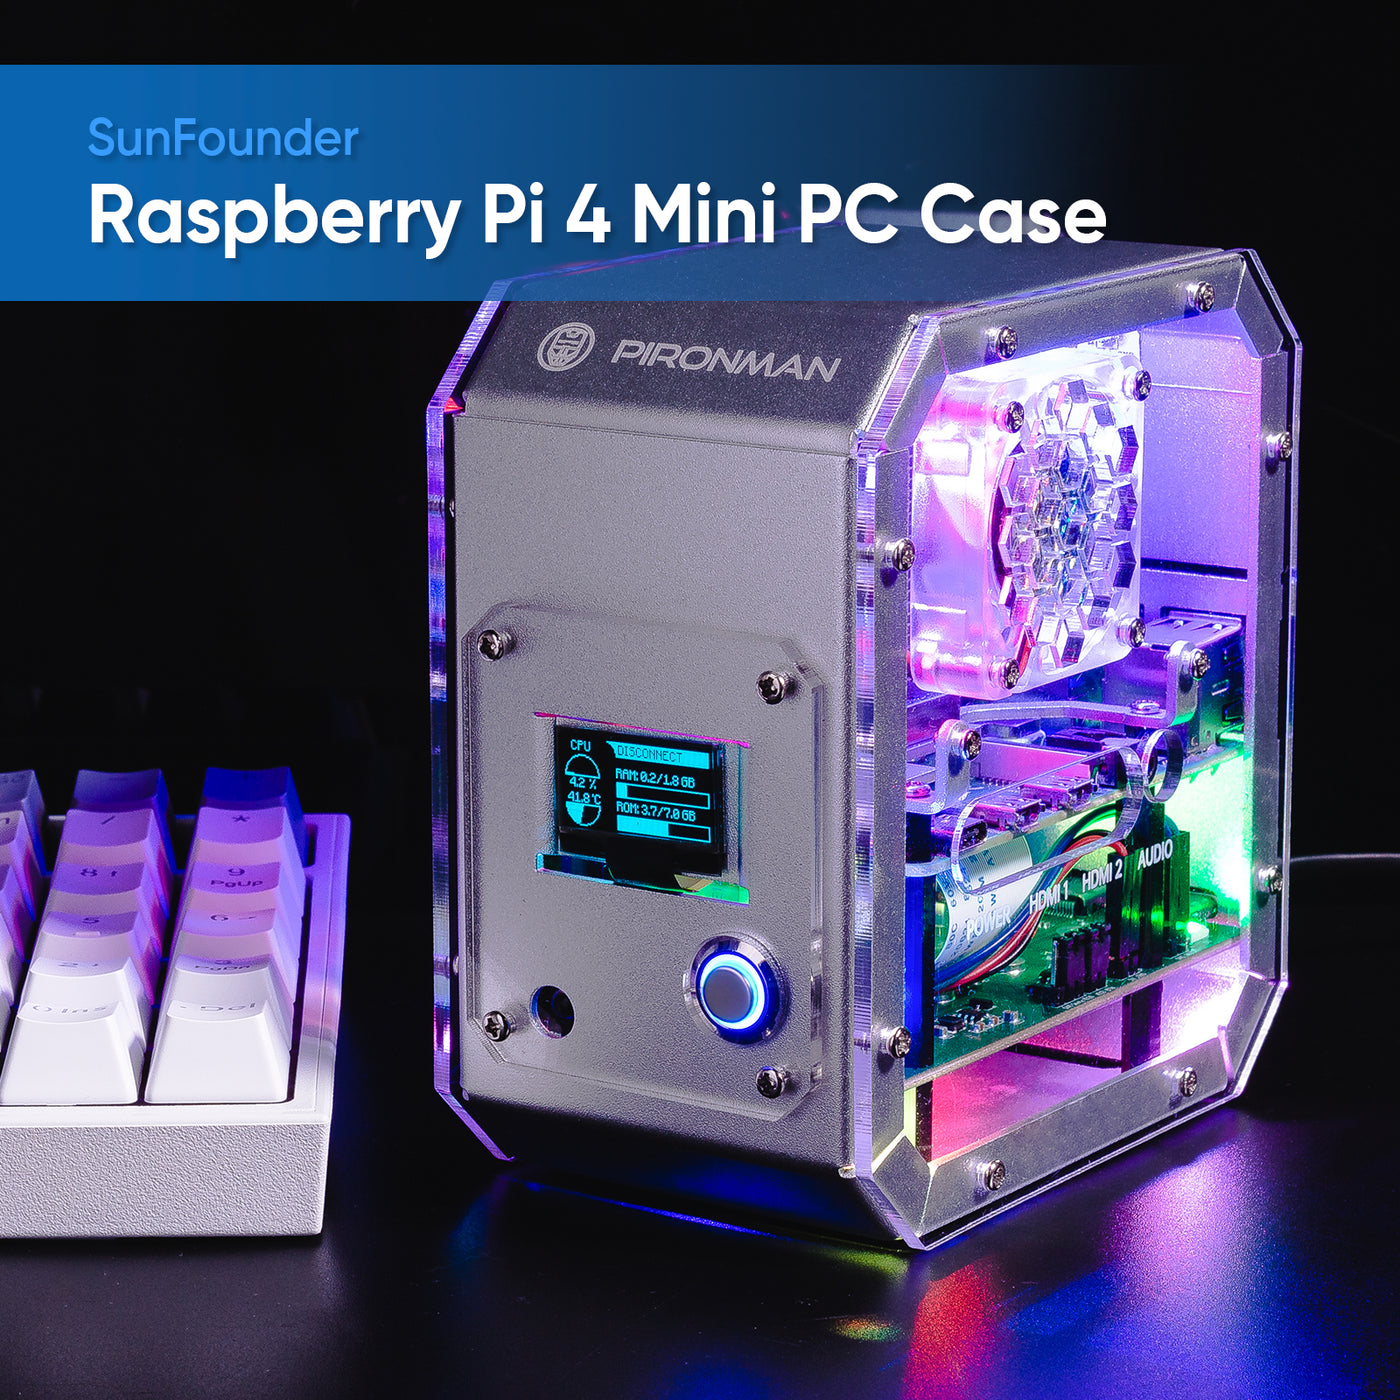 Raspberry Pi 4 Case, Raspberry Pi Mini PC - Aluminum Alloy Tower Case with Tower Cooler, M.2 SATA SSD Expansion Board, 0.96" OLED, IR Receiver and Power Button (Raspberry Pi Board Not Included)